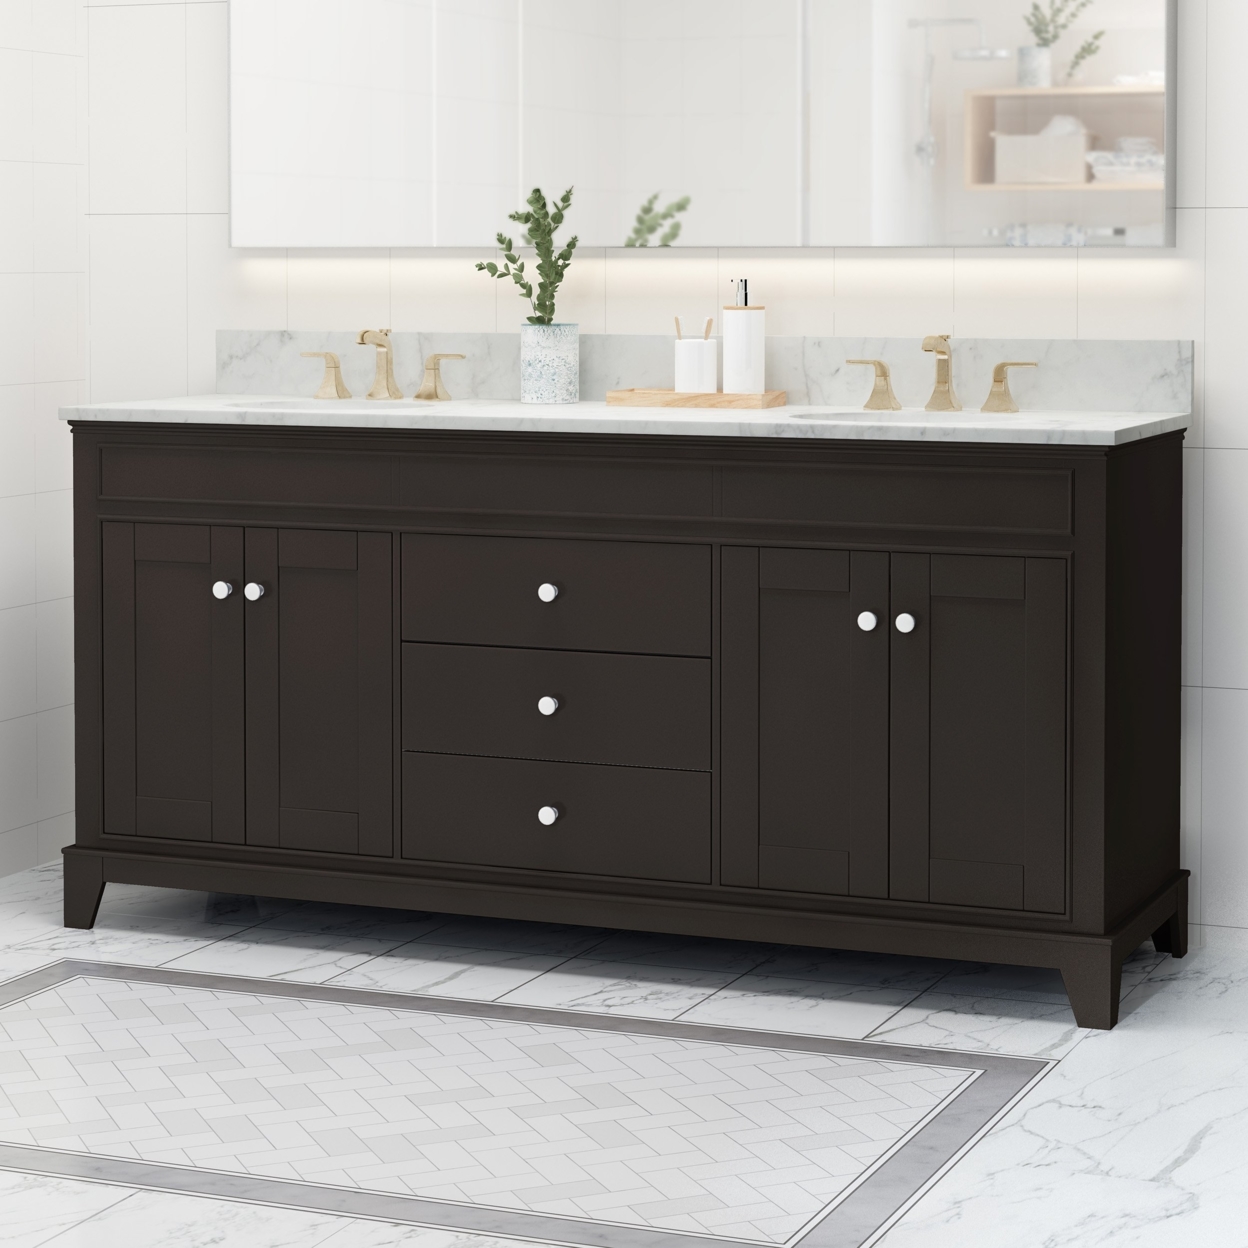 Feldspar Contemporary 72 Wood Double Sink Bathroom Vanity With Marble Counter Top With Carrara White Marble - White